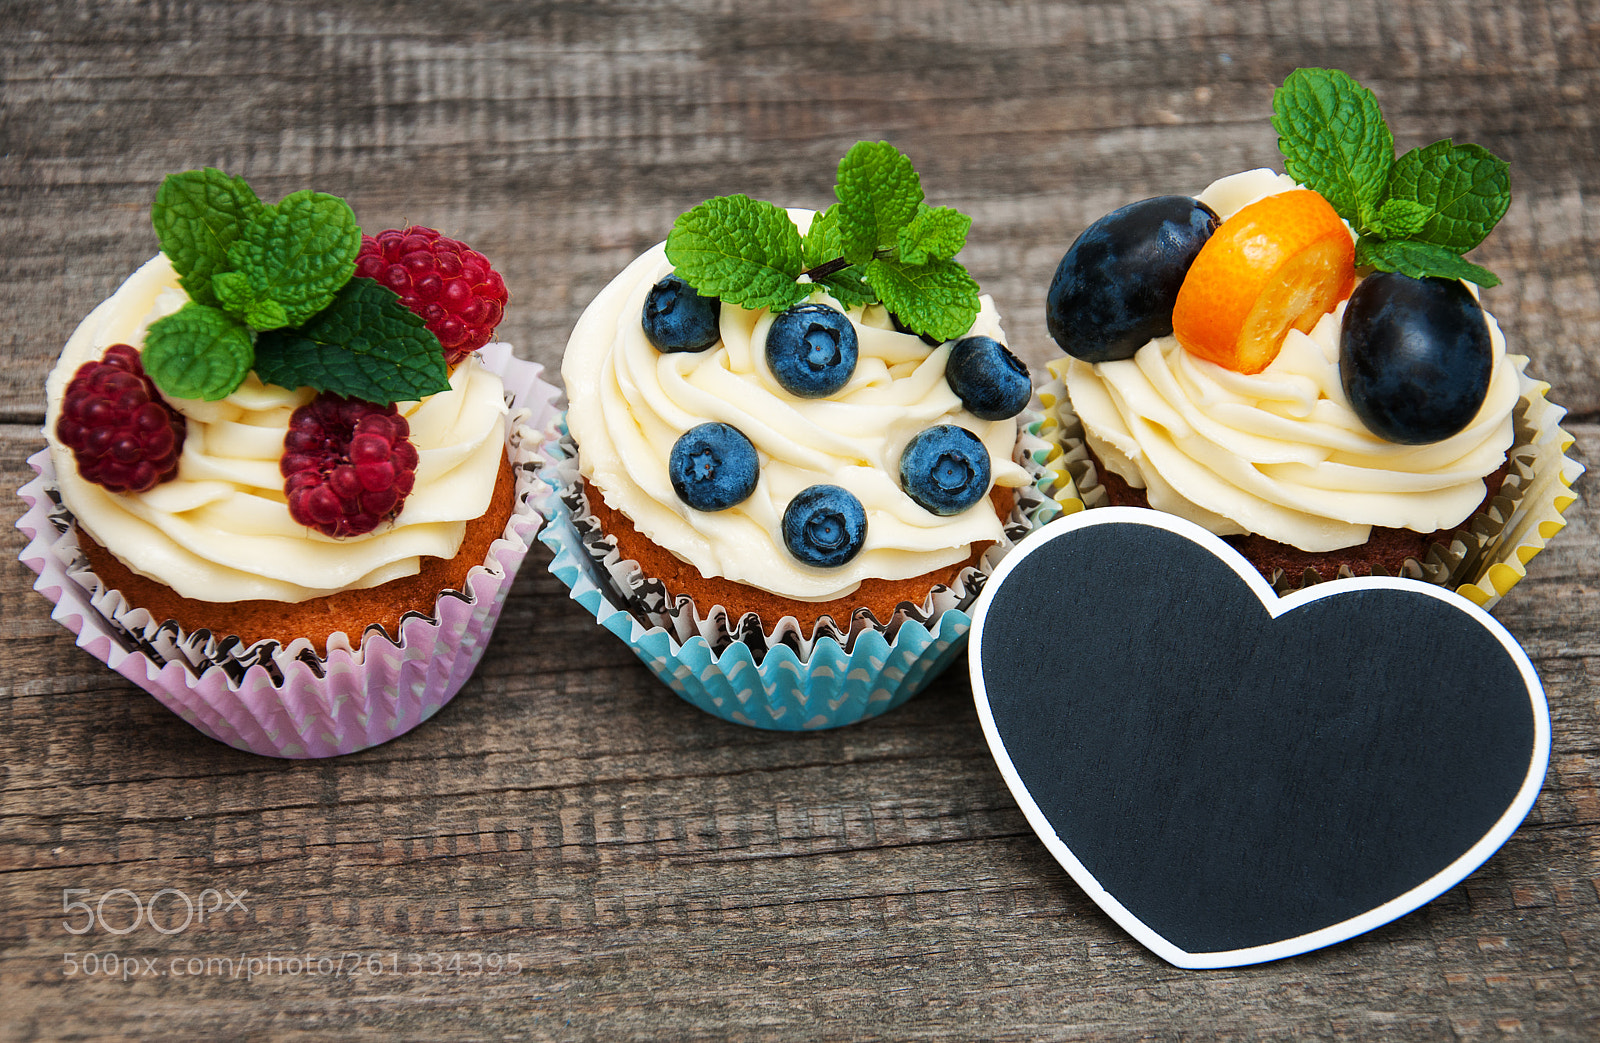 Nikon D90 sample photo. Cupcakes with fresh berries photography